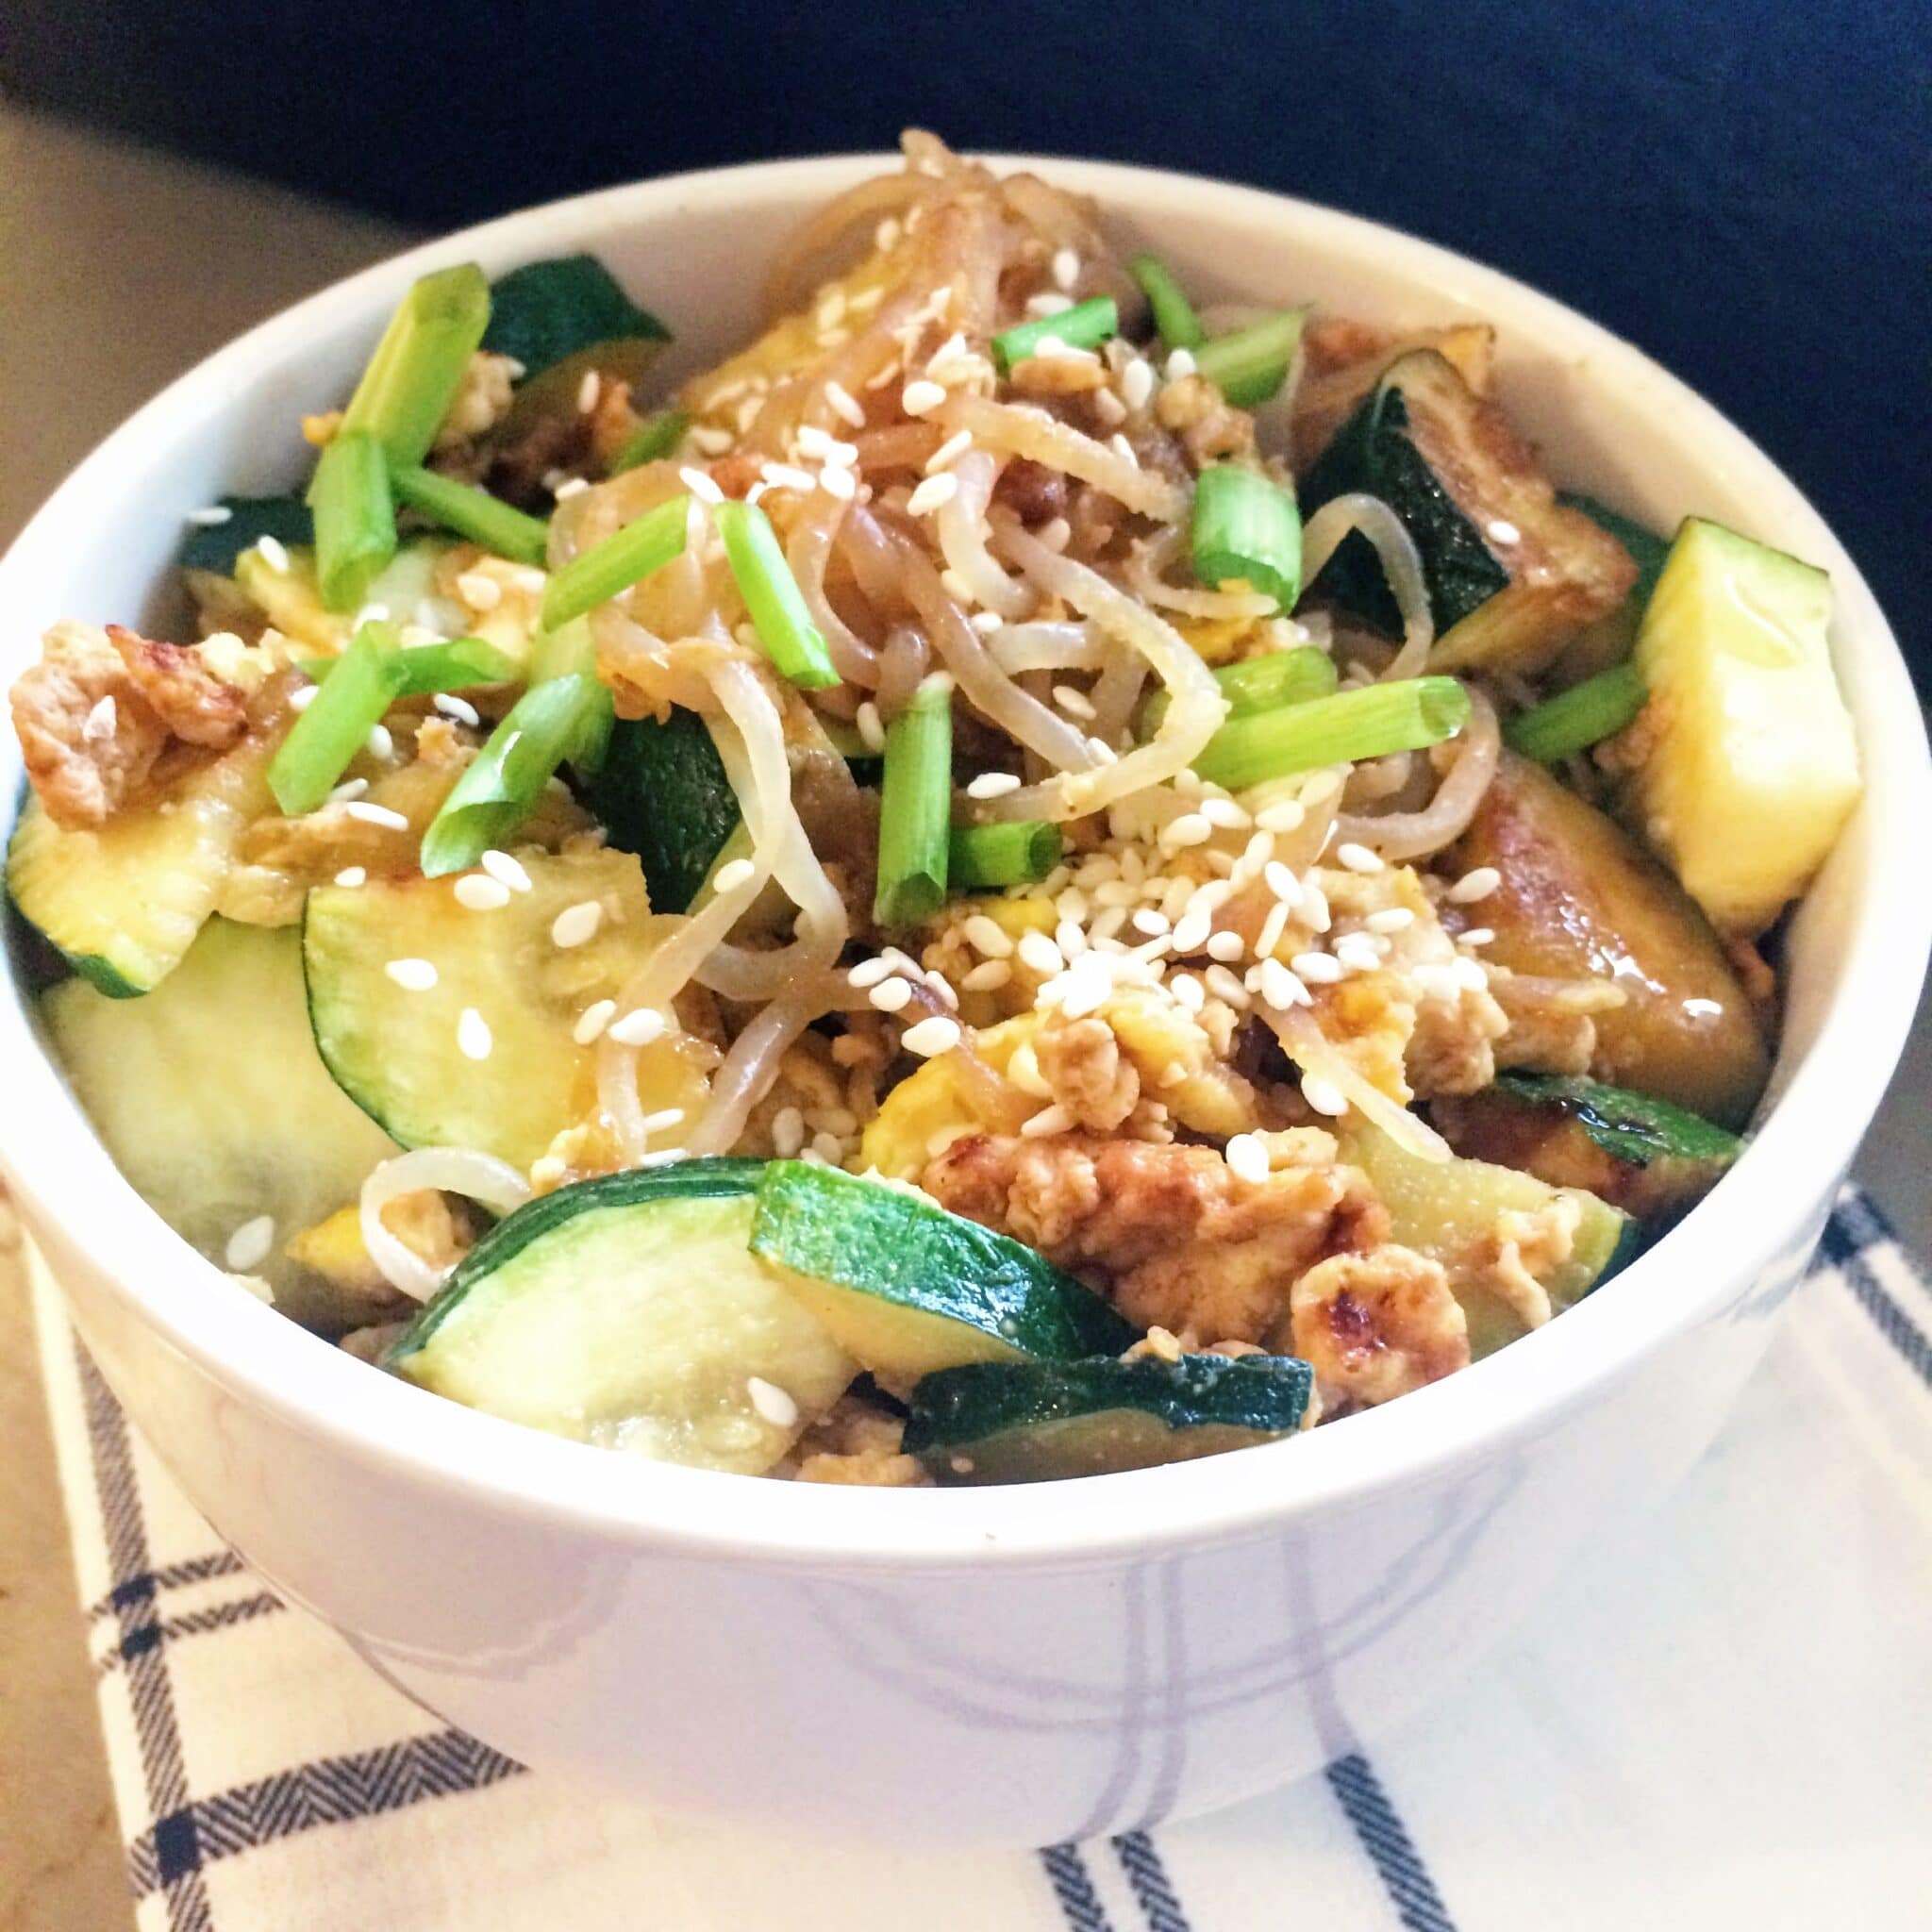 A white bowl full of konjac noodles and vegetables